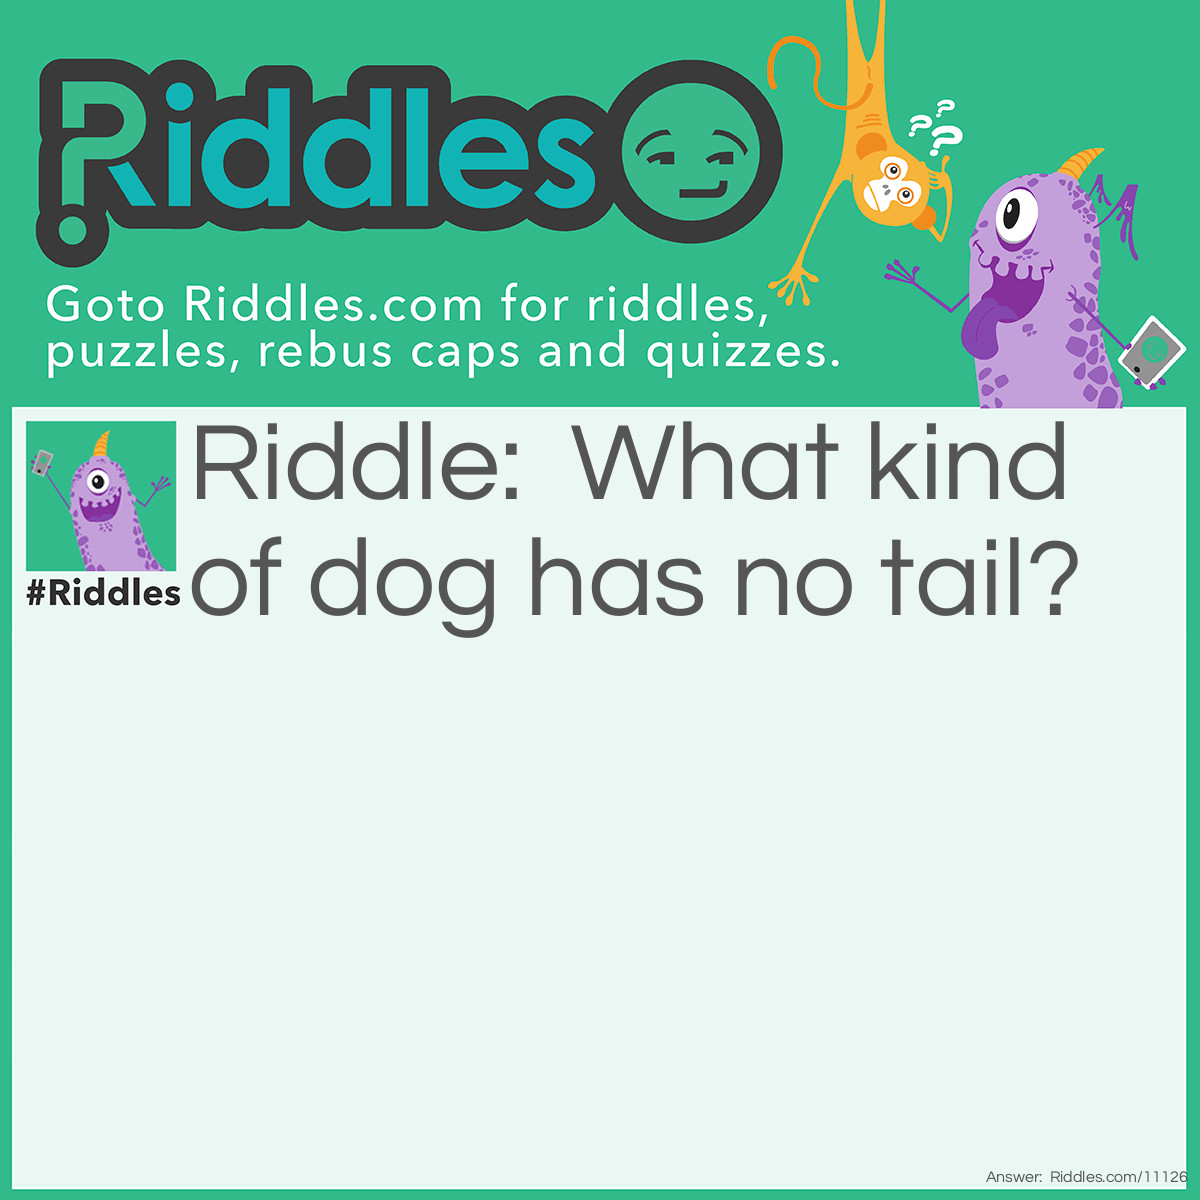 Riddle: What kind of dog has no tail? Answer: A hot dog.